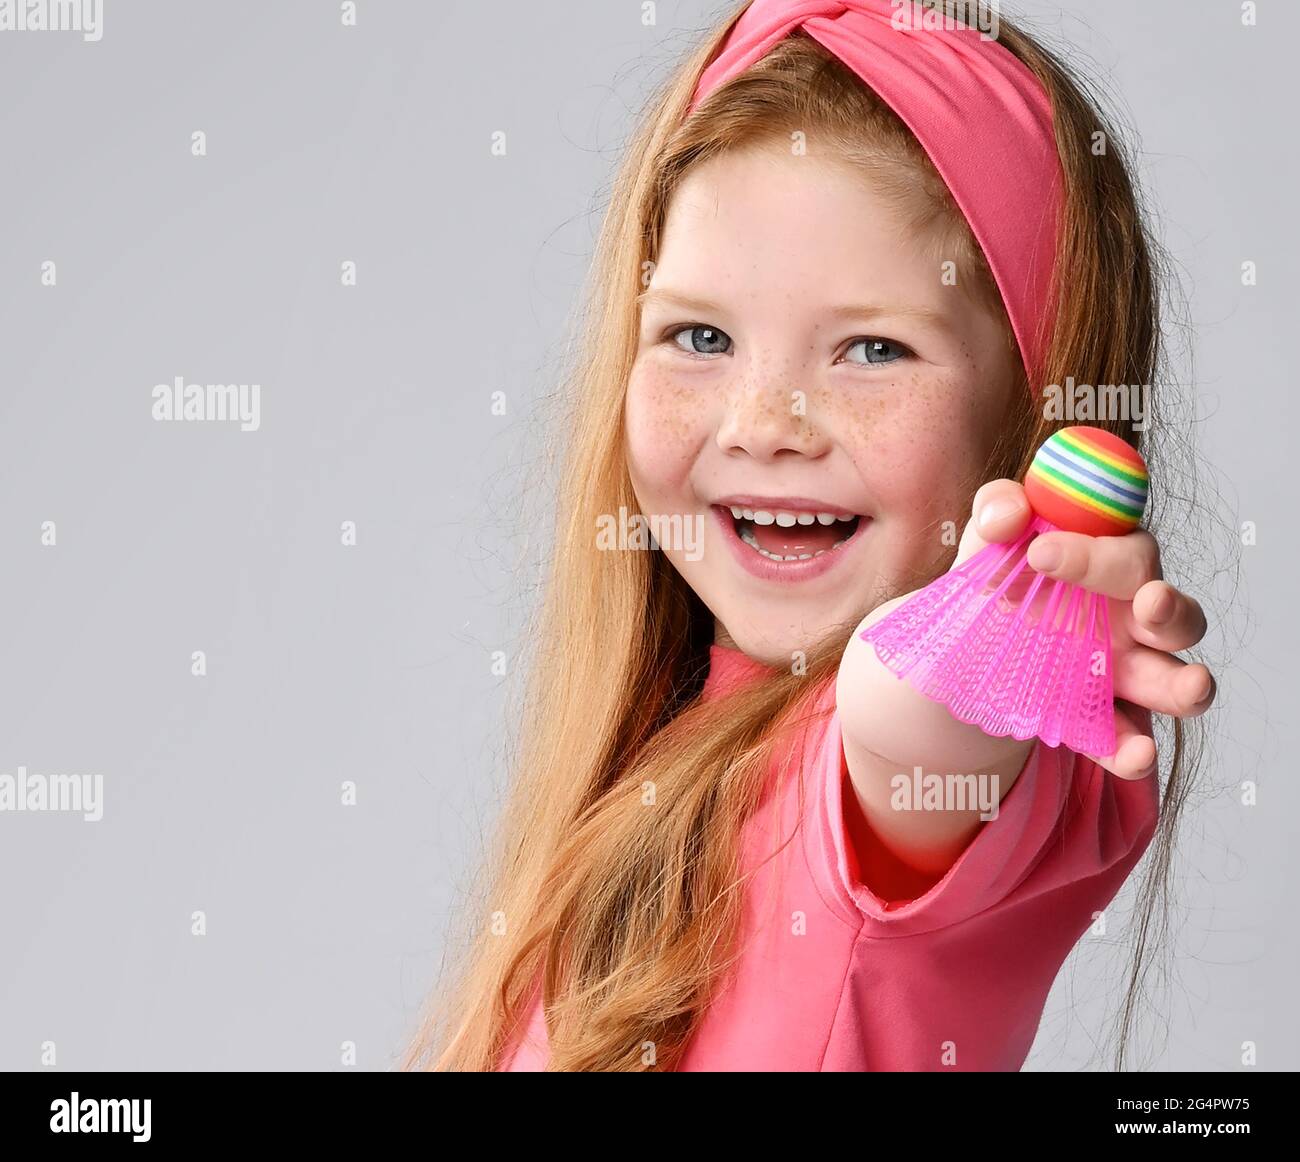 Happy laughing red-haired kid girl in pink t-shirt and headband holds, shows a badminton shuttlecock in hand Stock Photo